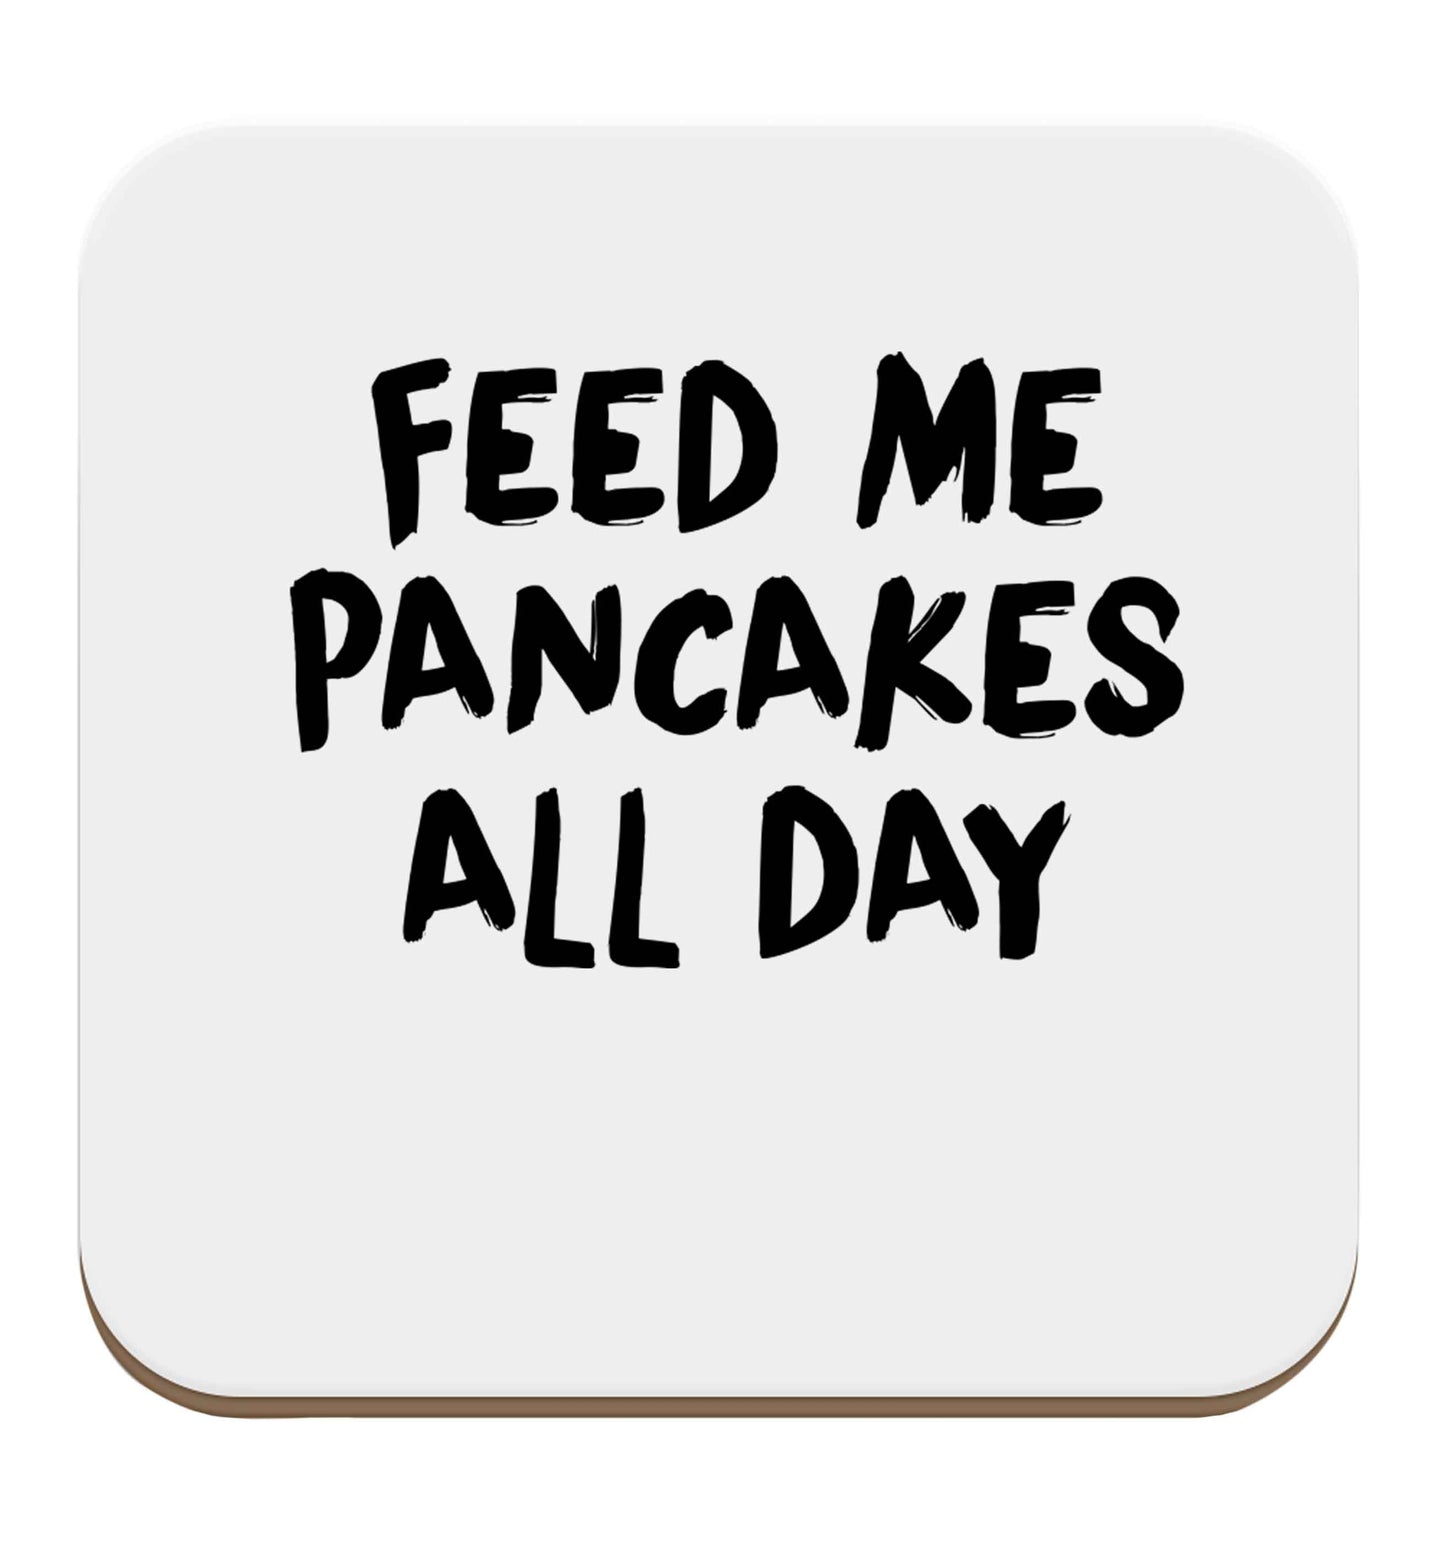 Feed me pancakes all day set of four coasters